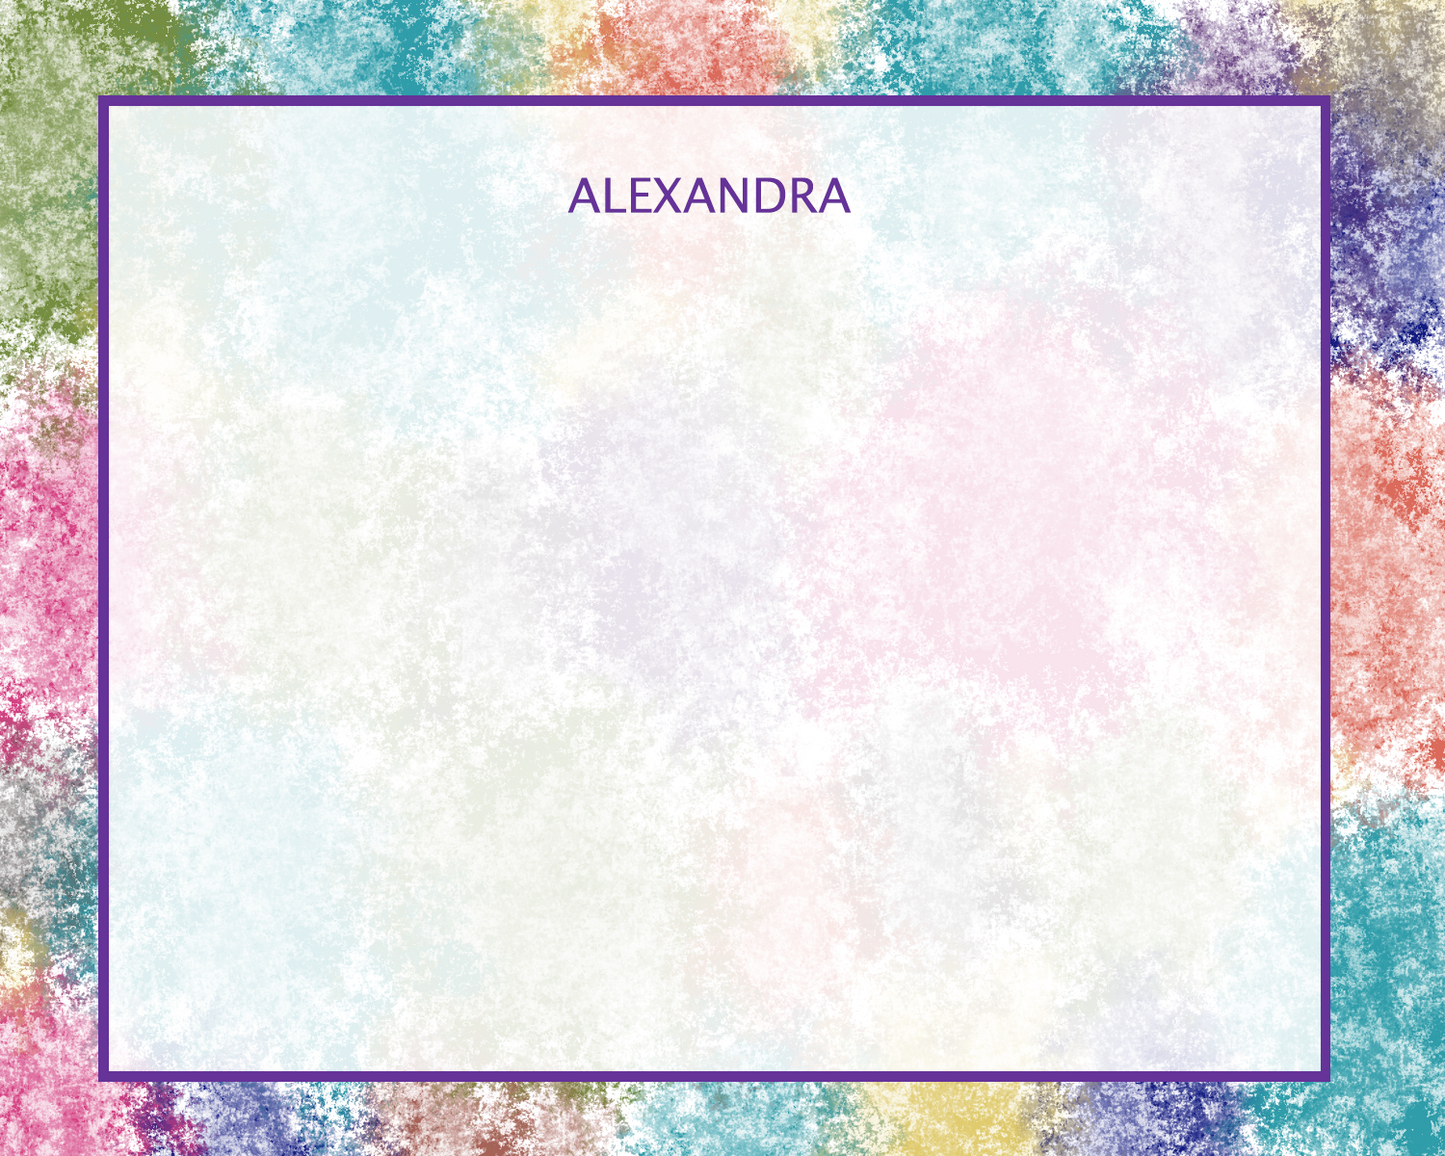 Alexandra Personalized Gift Cards